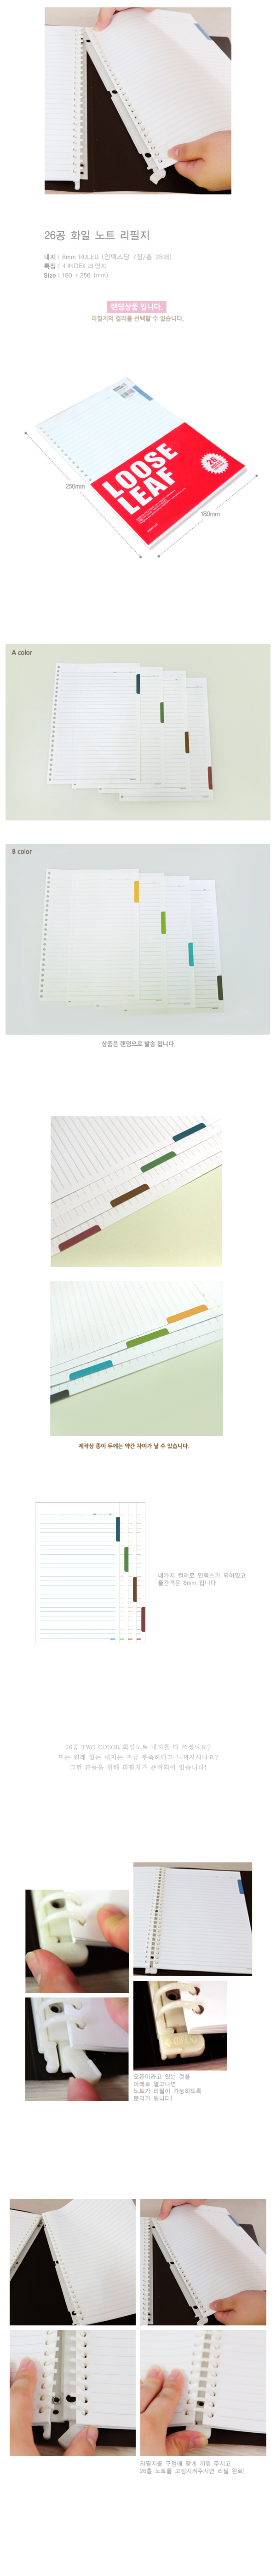 5000_26hole_Two_color_file_notebook_refill.jpg